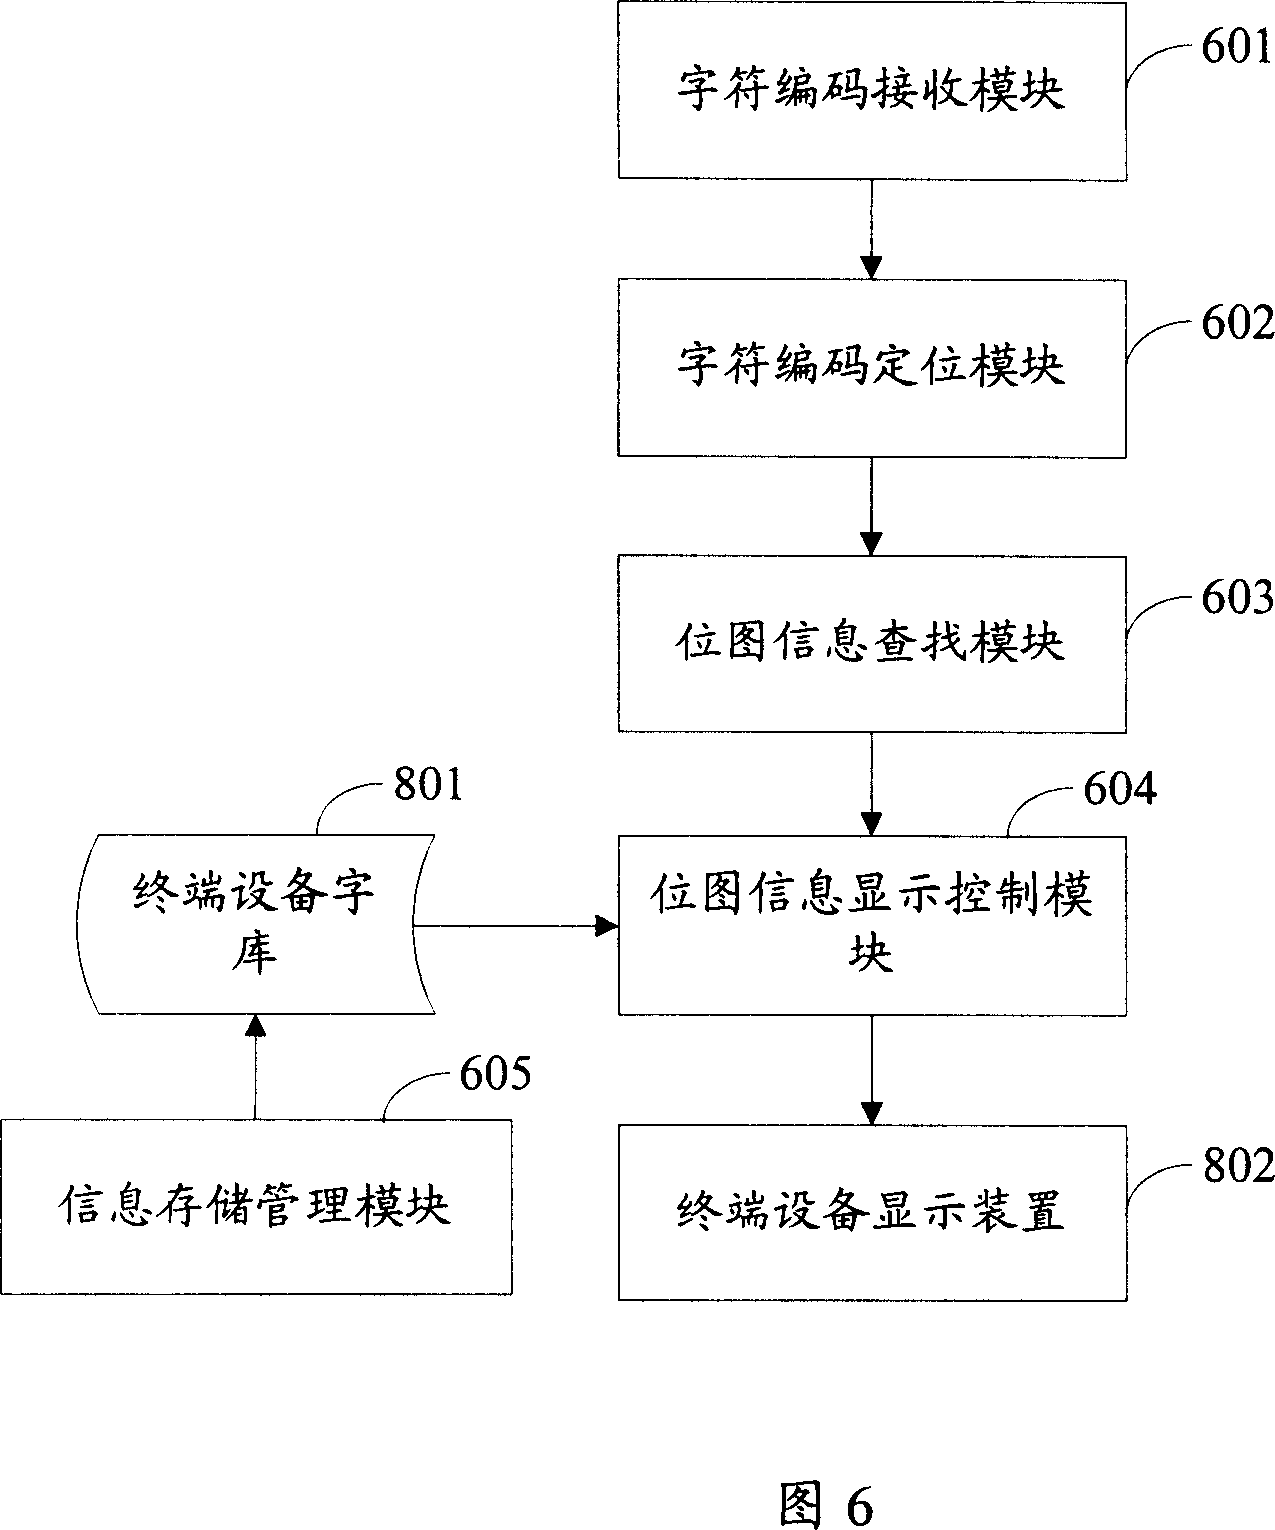 Method and system for inputting and displaying character